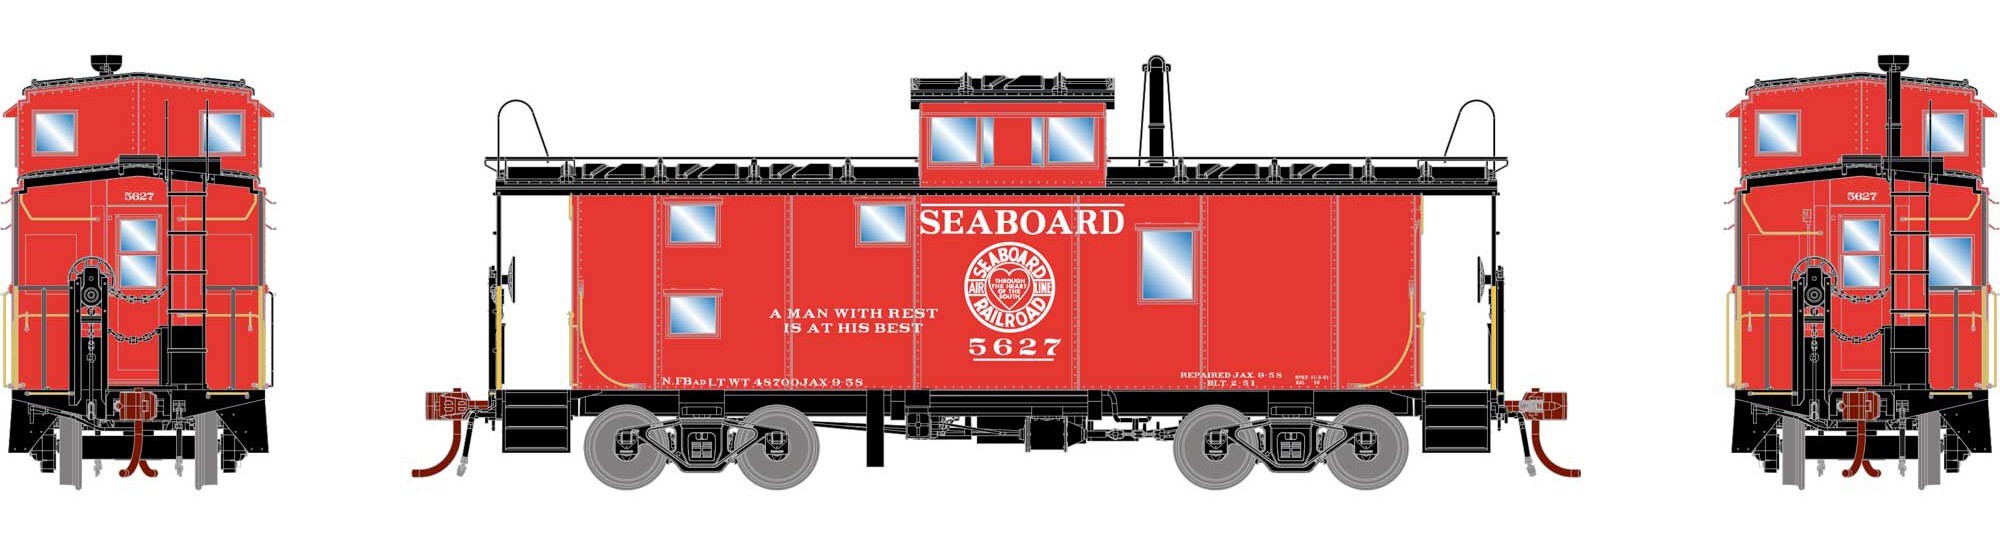 Athearn Genesis HO ATHG78588 DCC/NCE Decoder Equipped ICC Caboose with Lights Seaboard SAL #5627